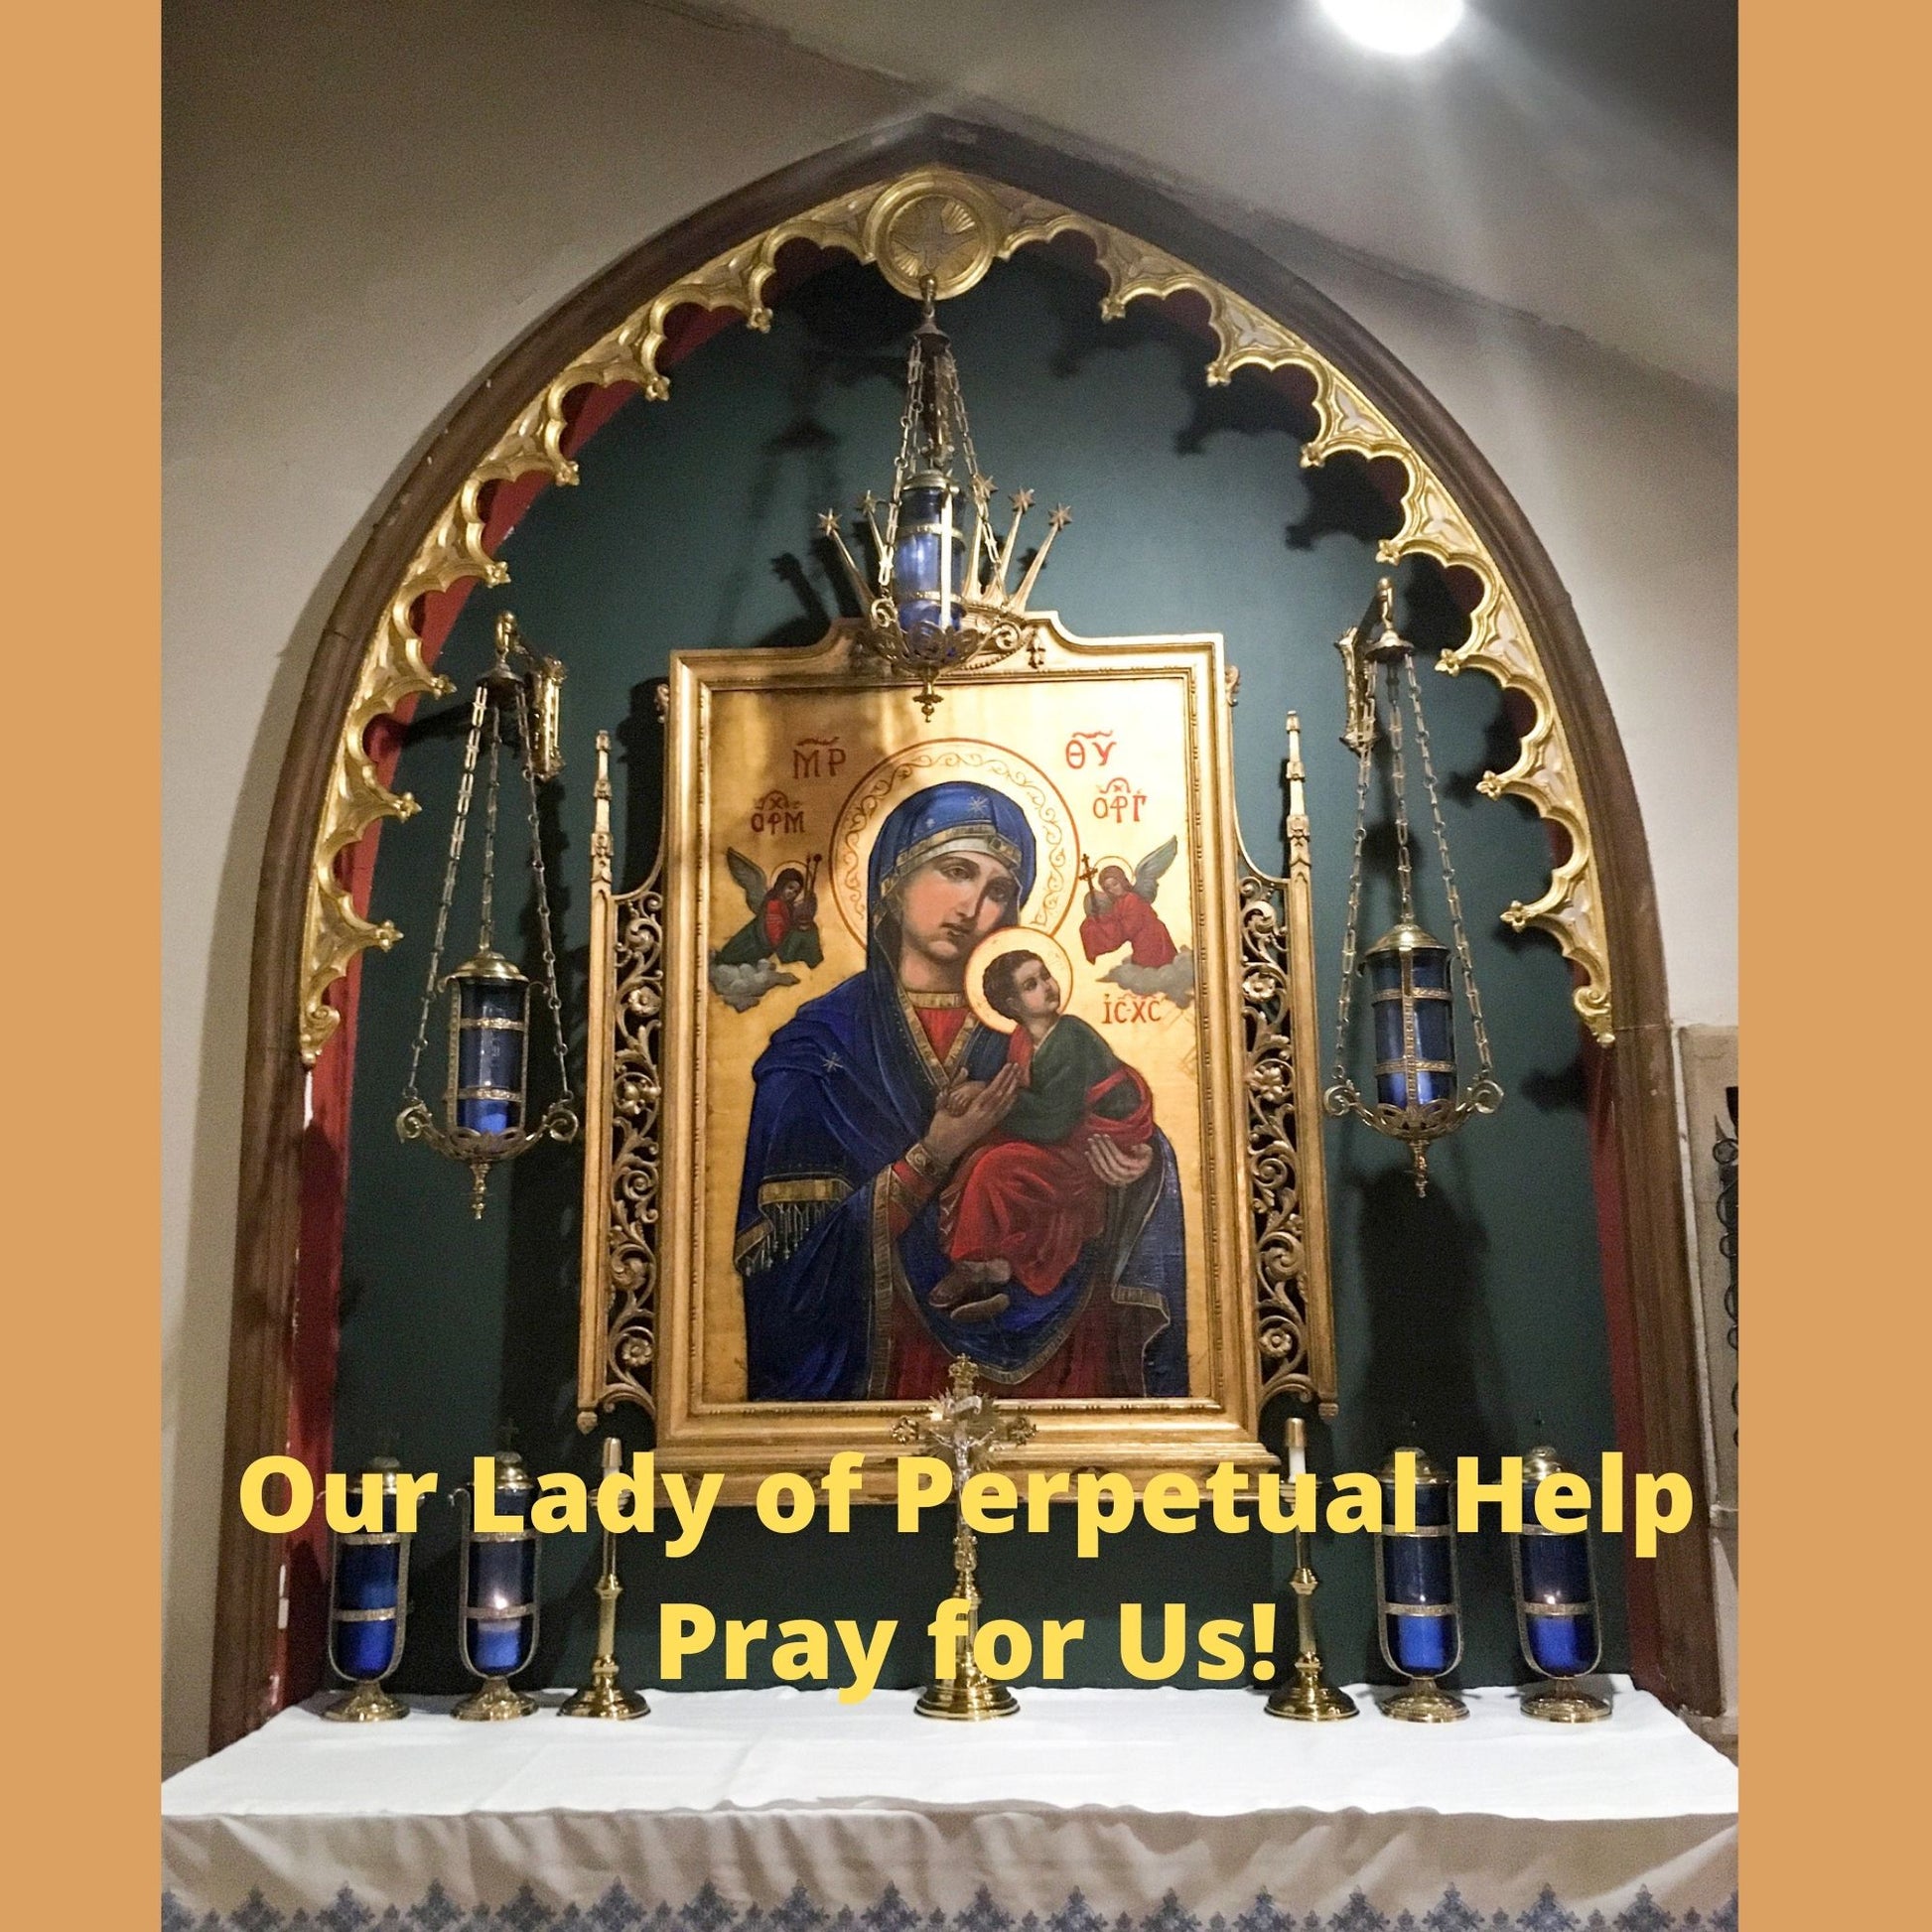 Our Lady of Perpetual Help ebook PDF - Bob and Penny Lord